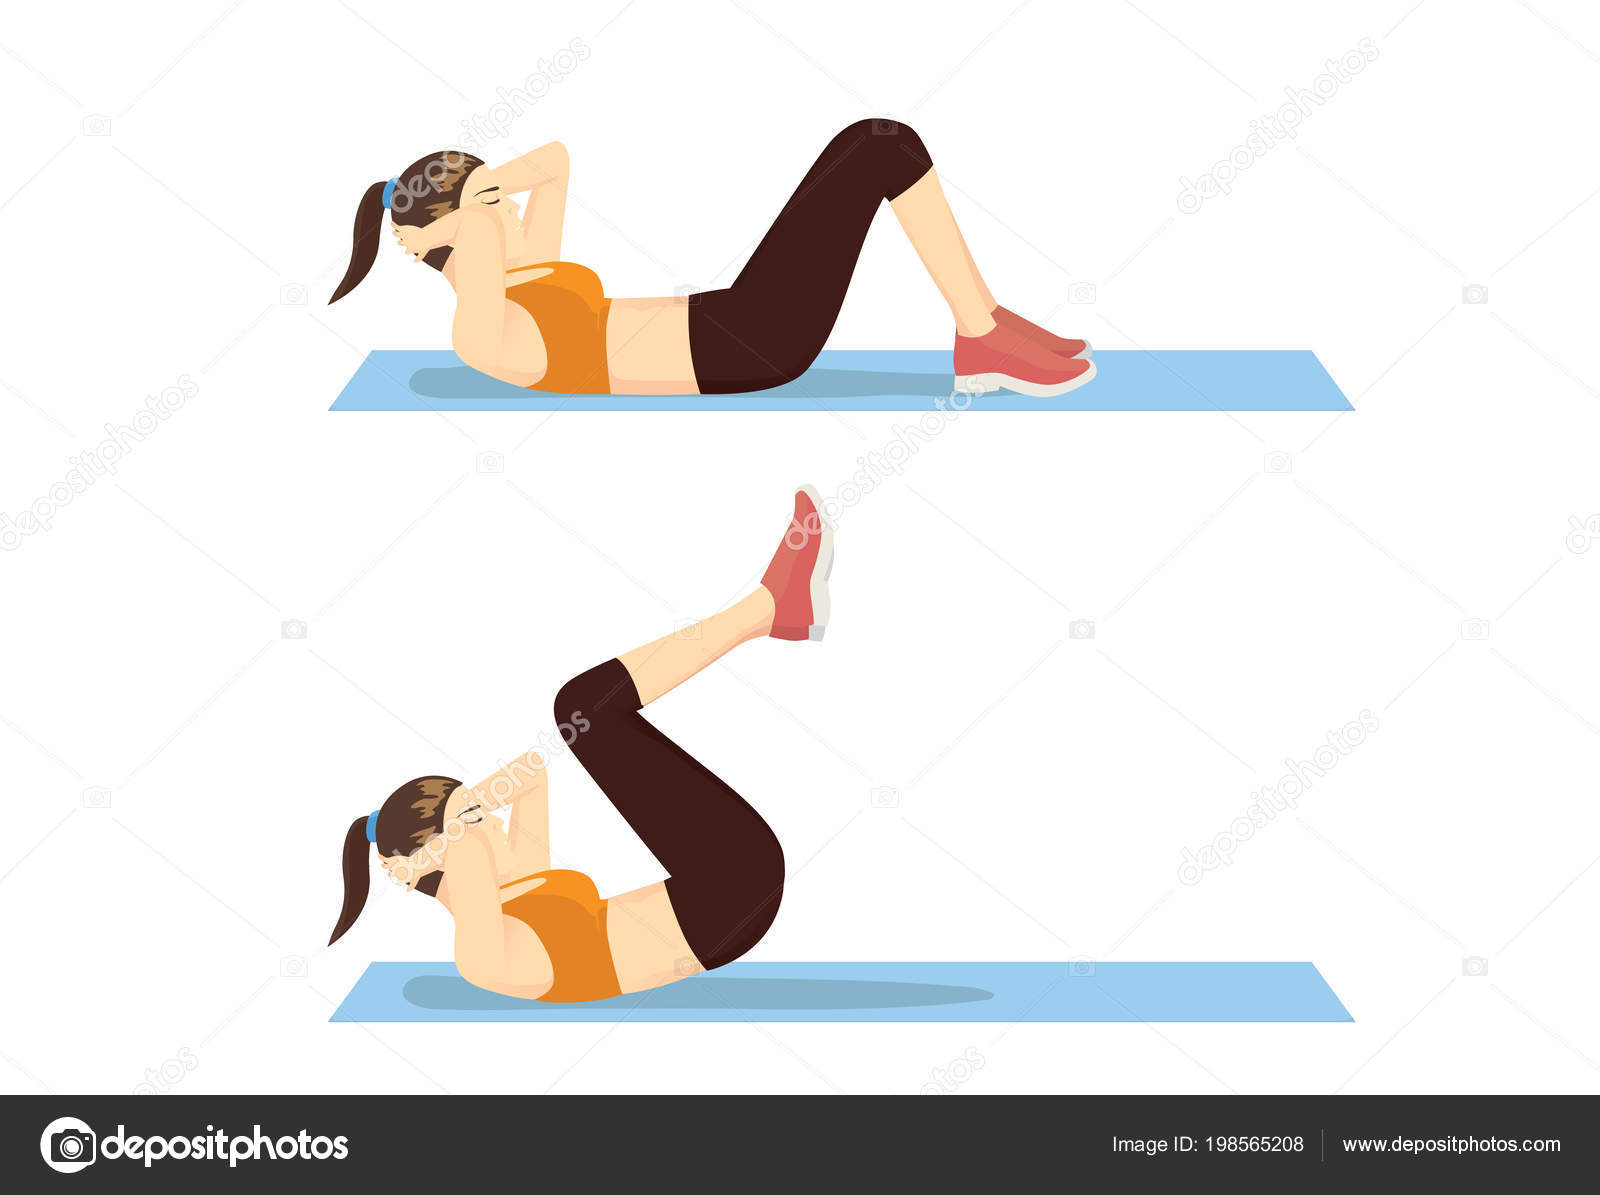 Exercise Step Reverse Crunch Healthy Woman Illustration Correct Moves